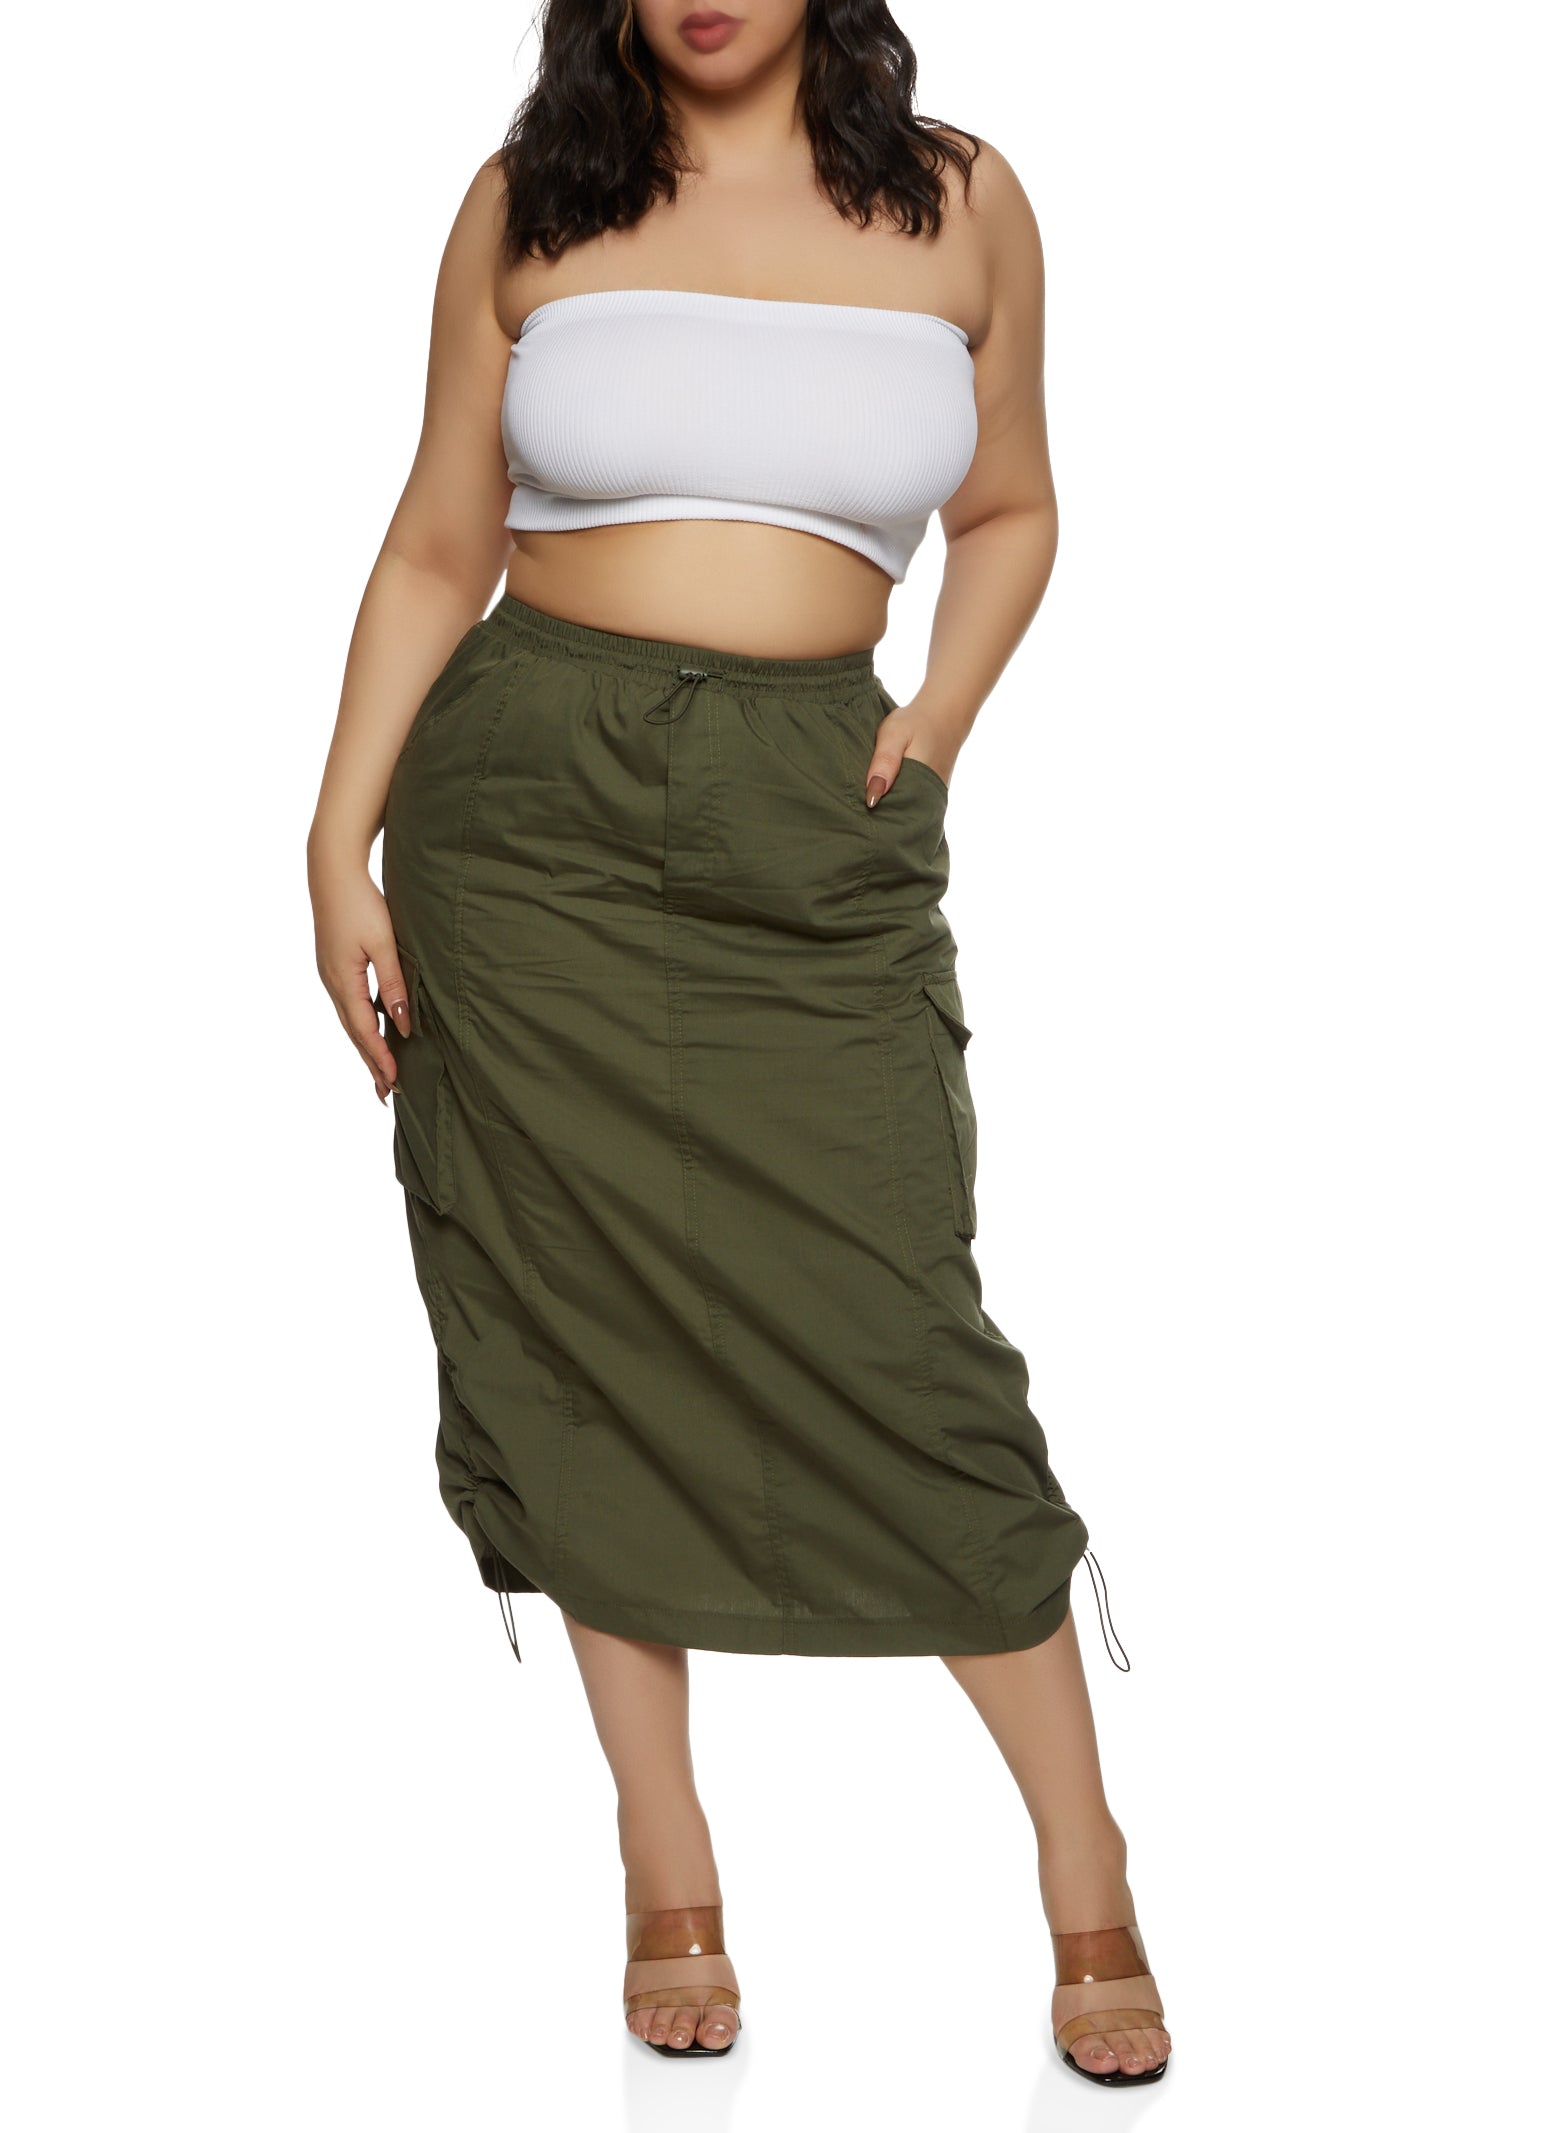 Plus Size Cargo Skirts, Everyday Low Prices